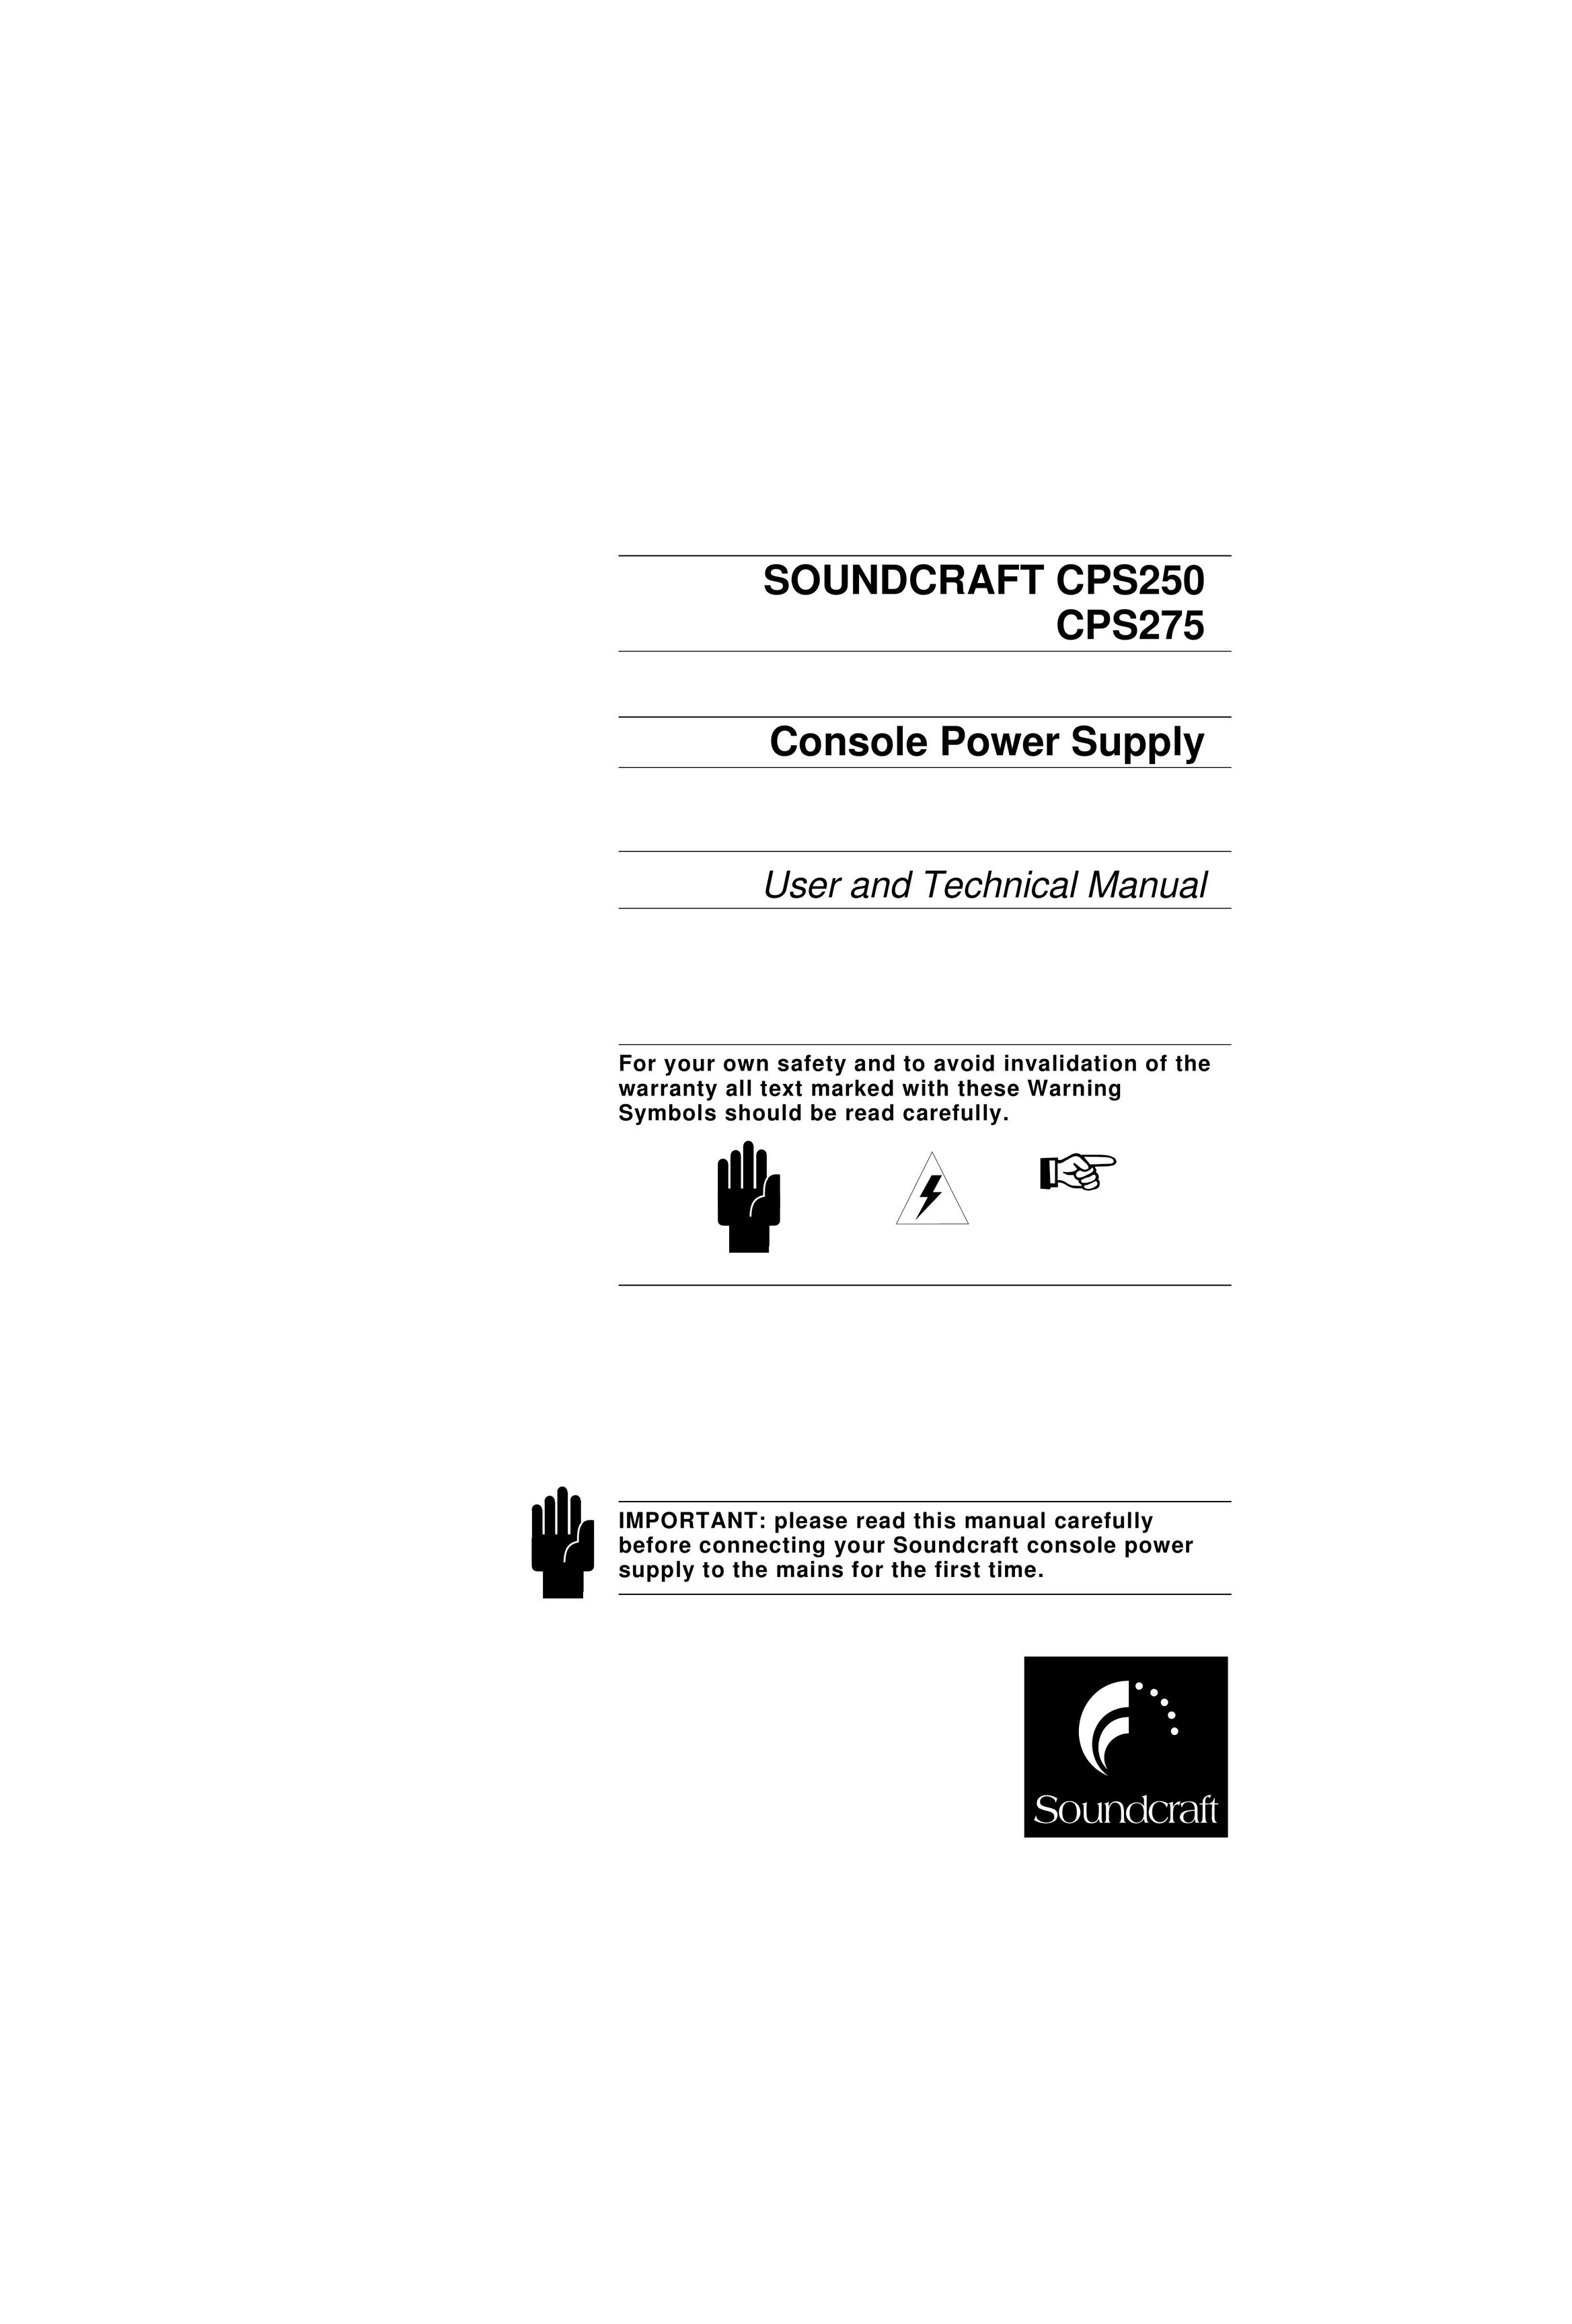 SoundCraft CPS250 Power Supply User Manual